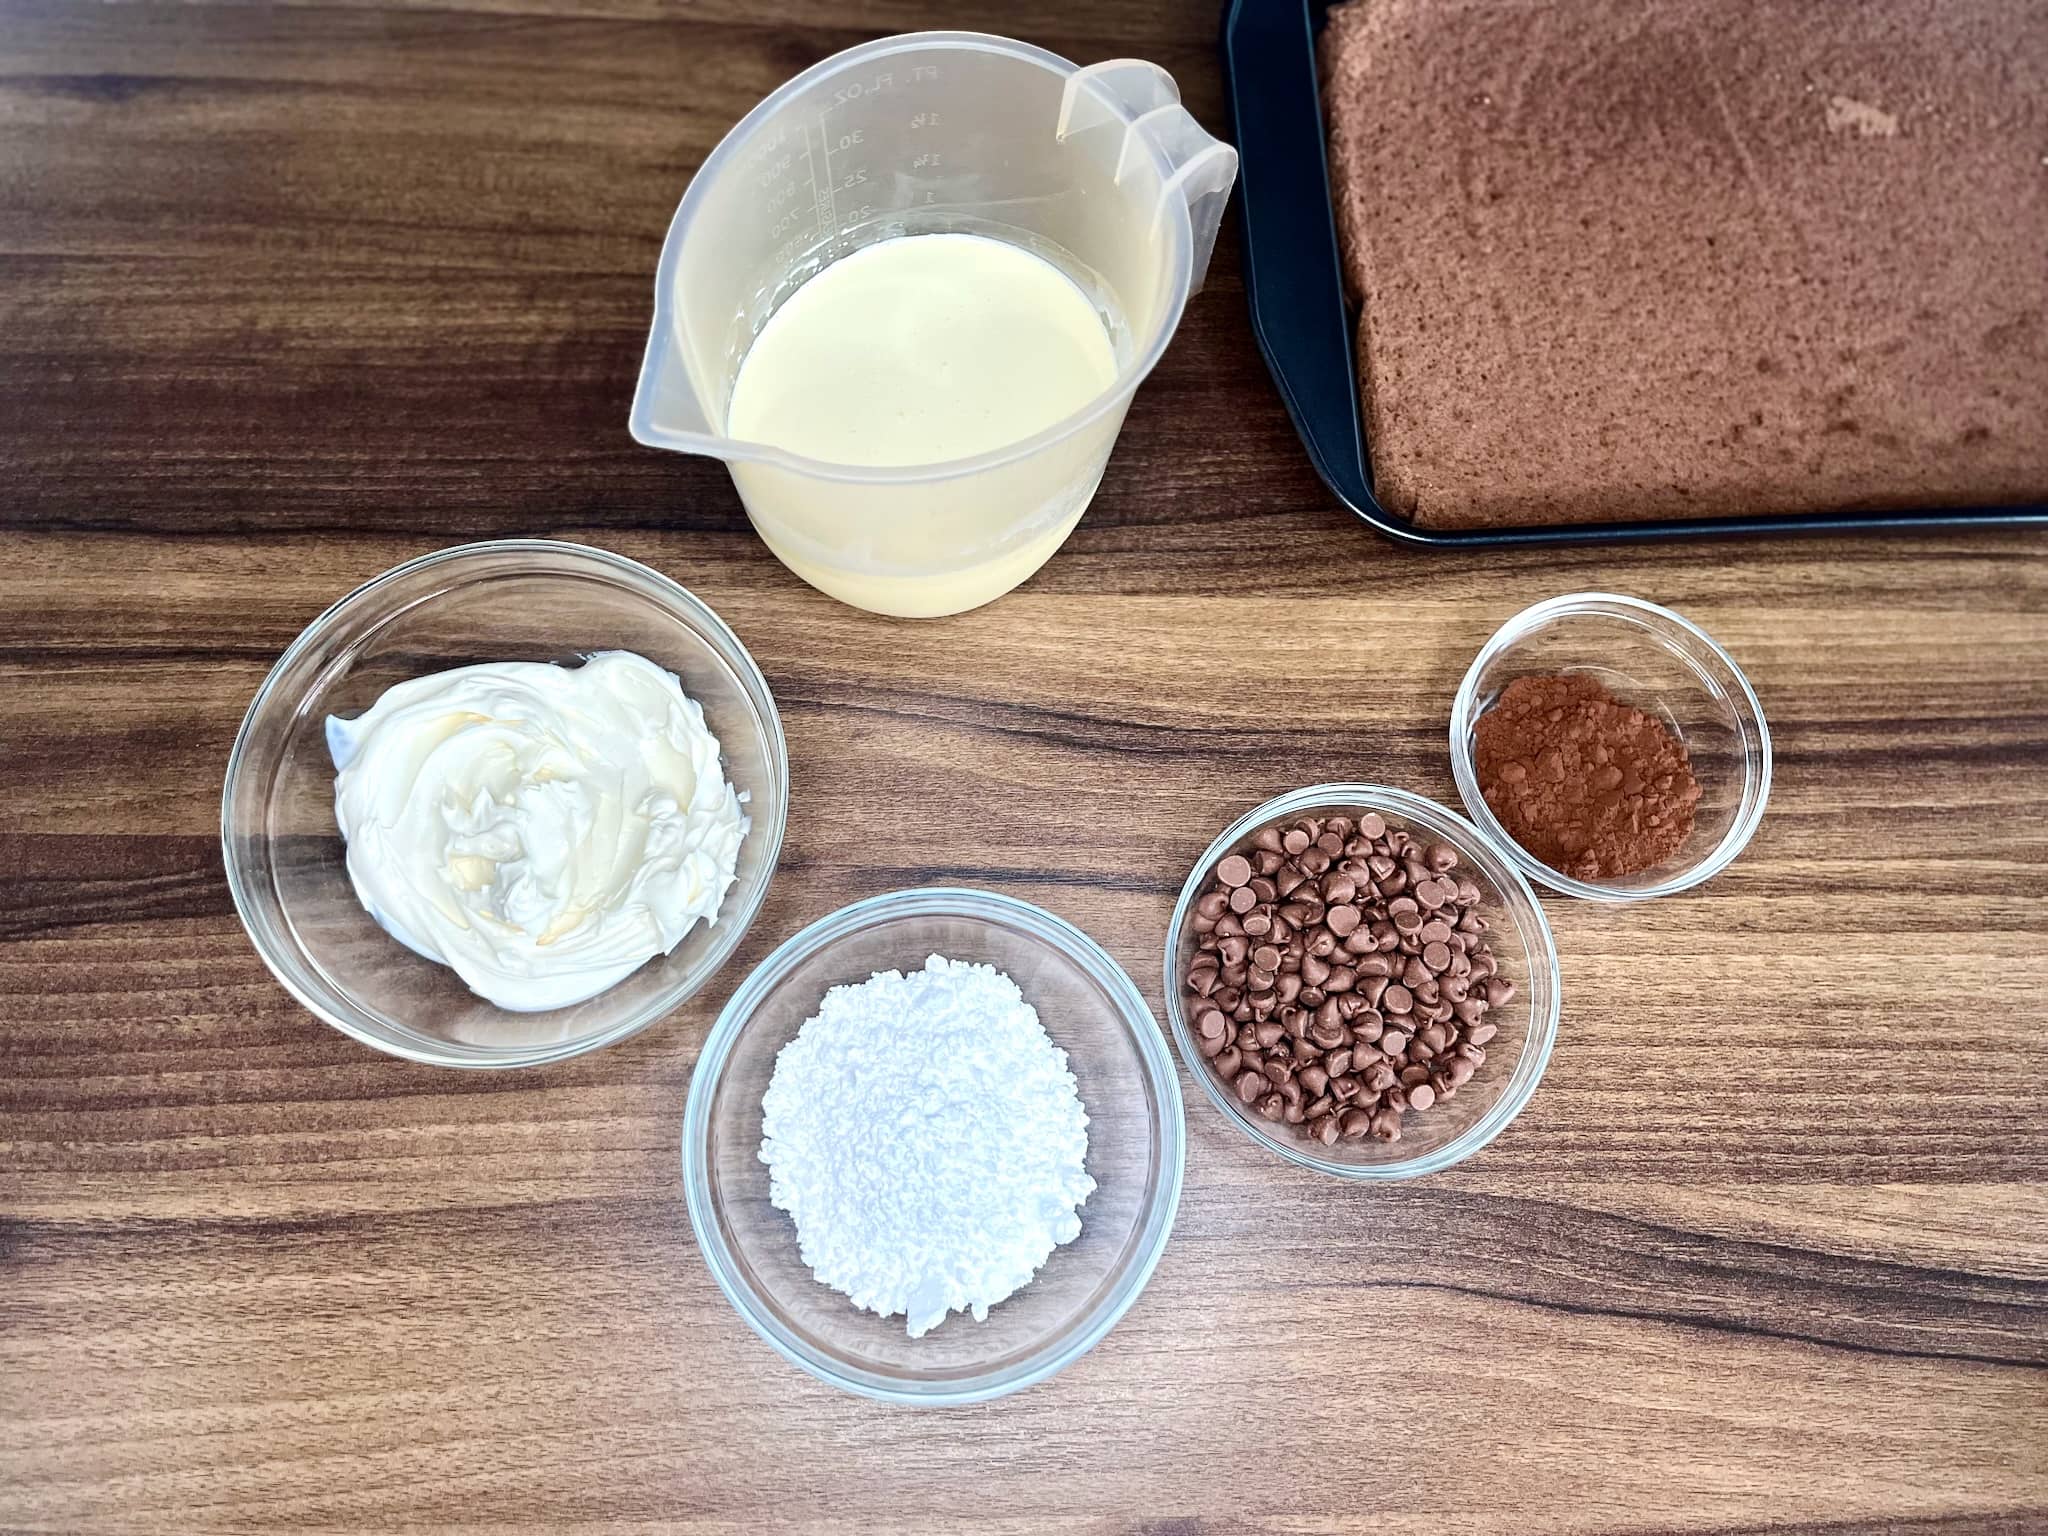 Ingredients on the tabletop for making chocolate cream